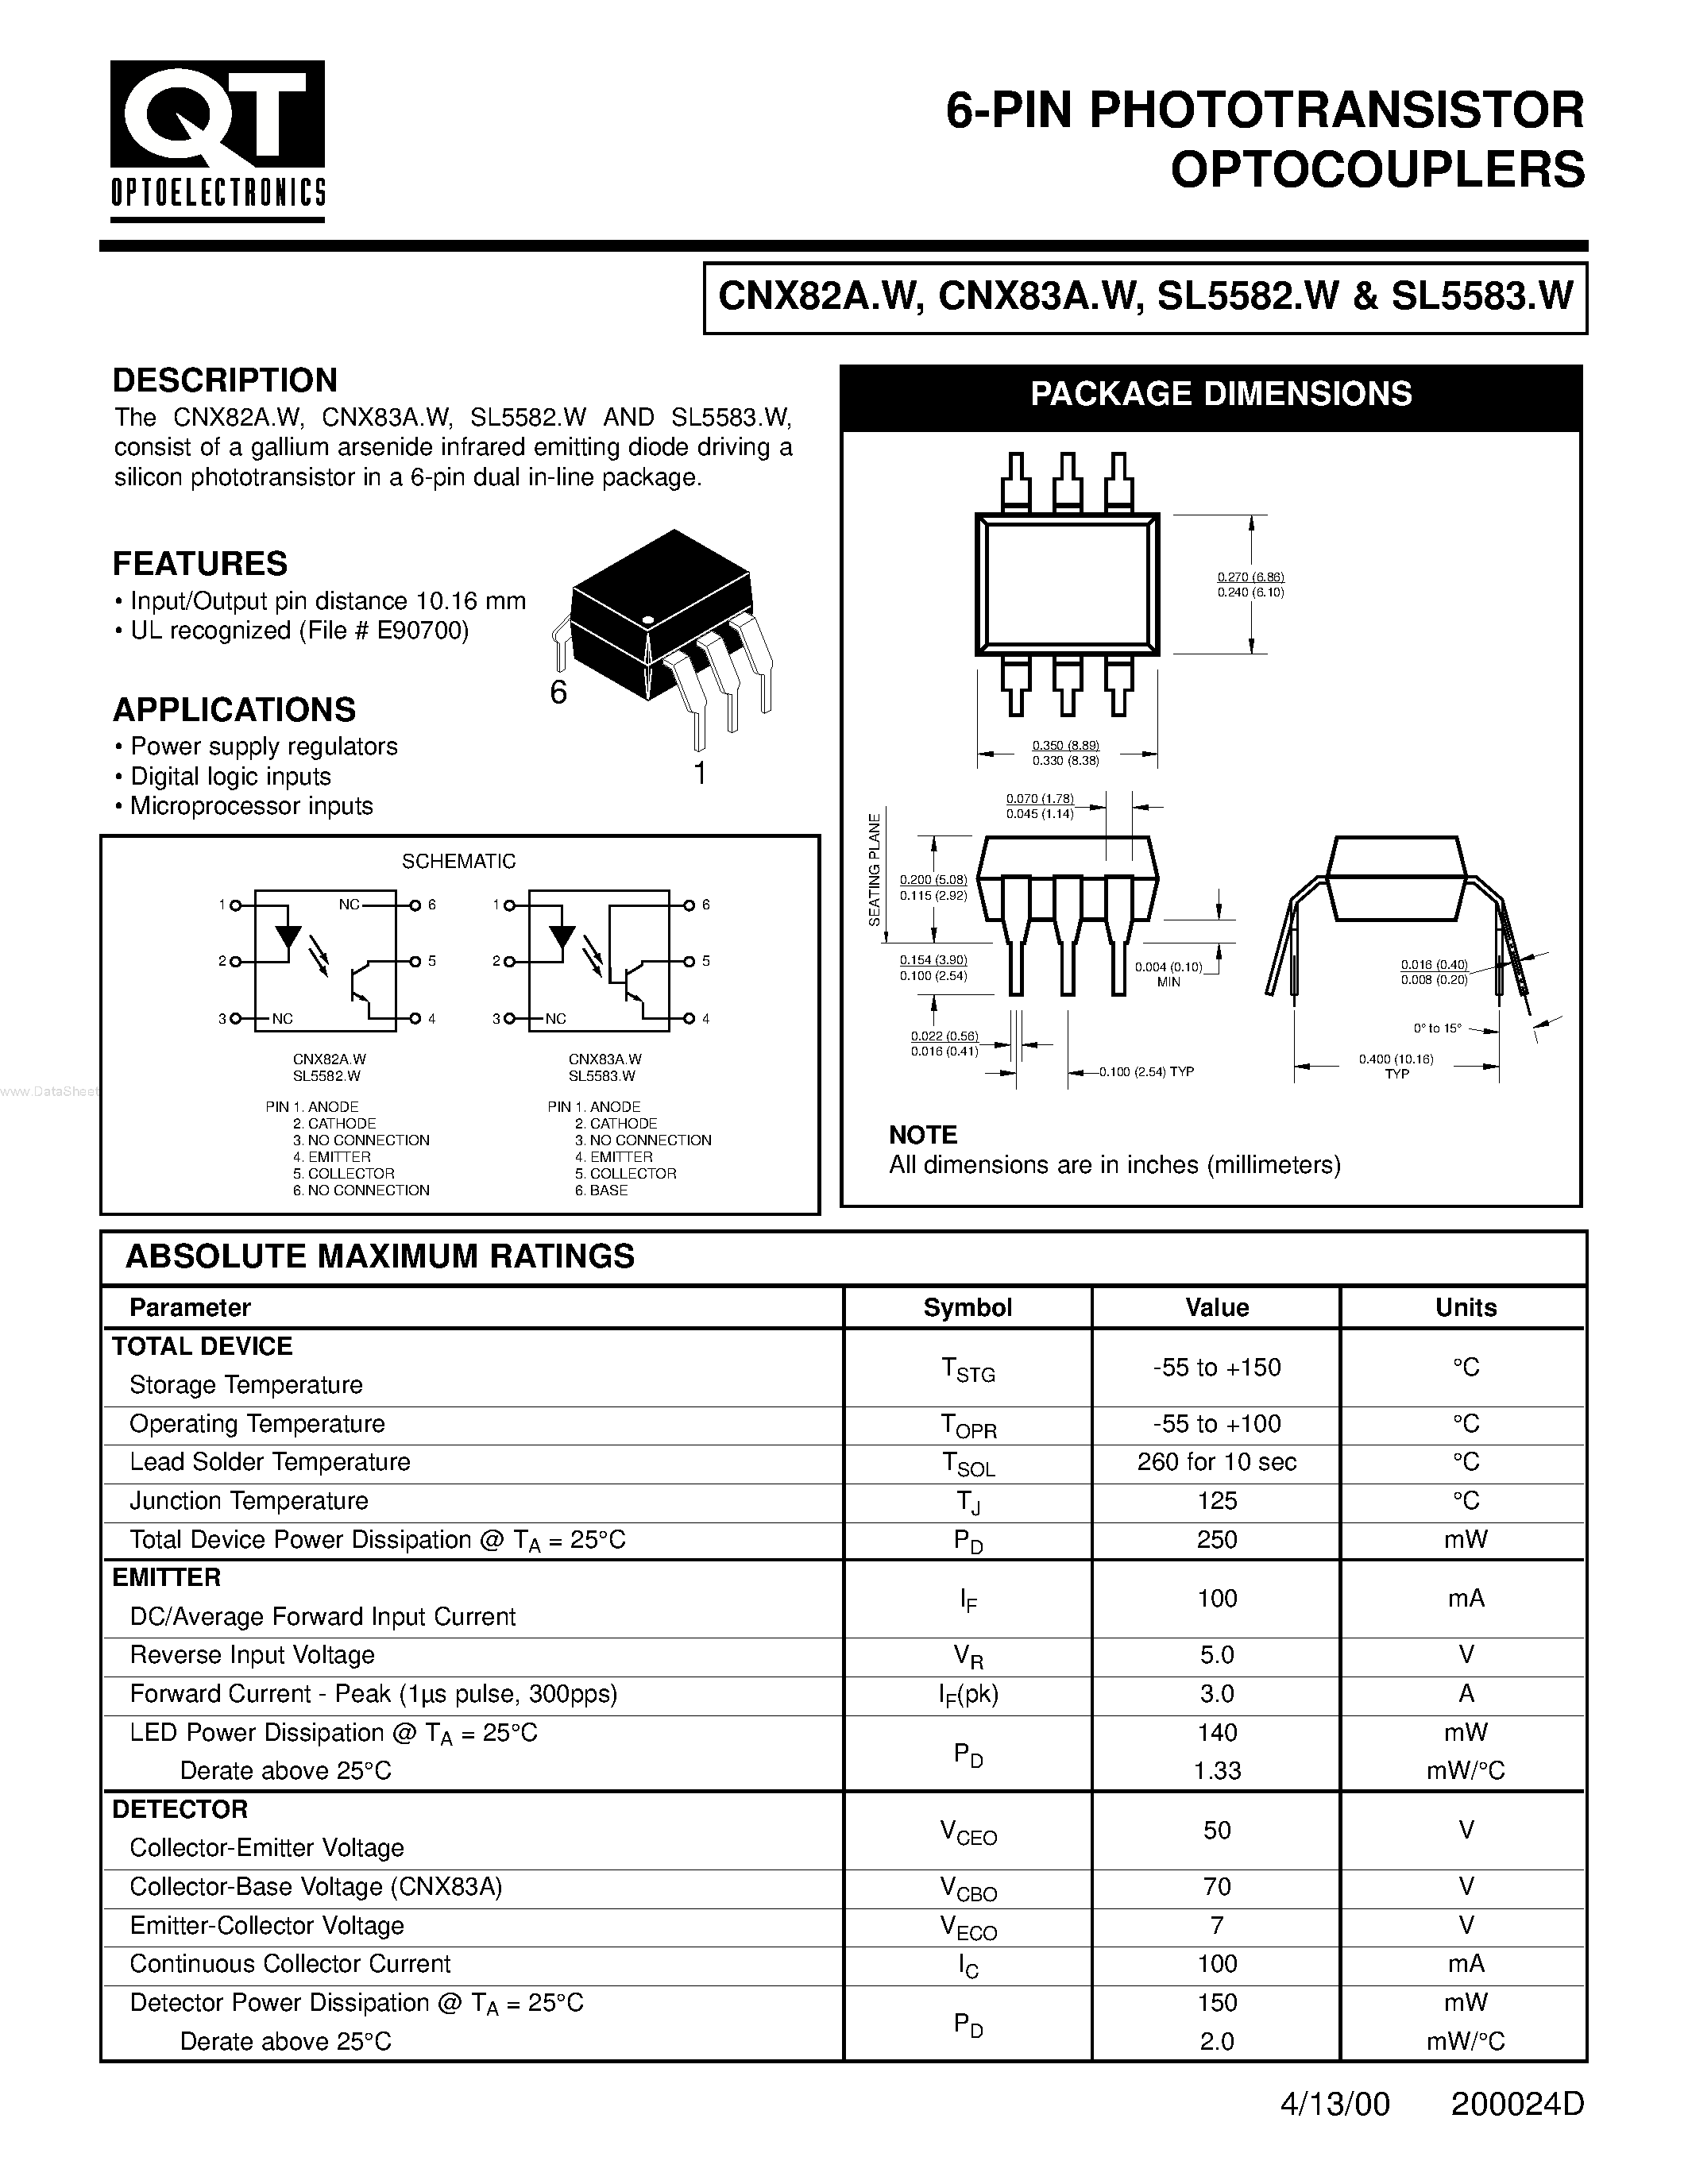 Datasheet CNX82A.W - 6-pin phototransistor optocouplers page 1